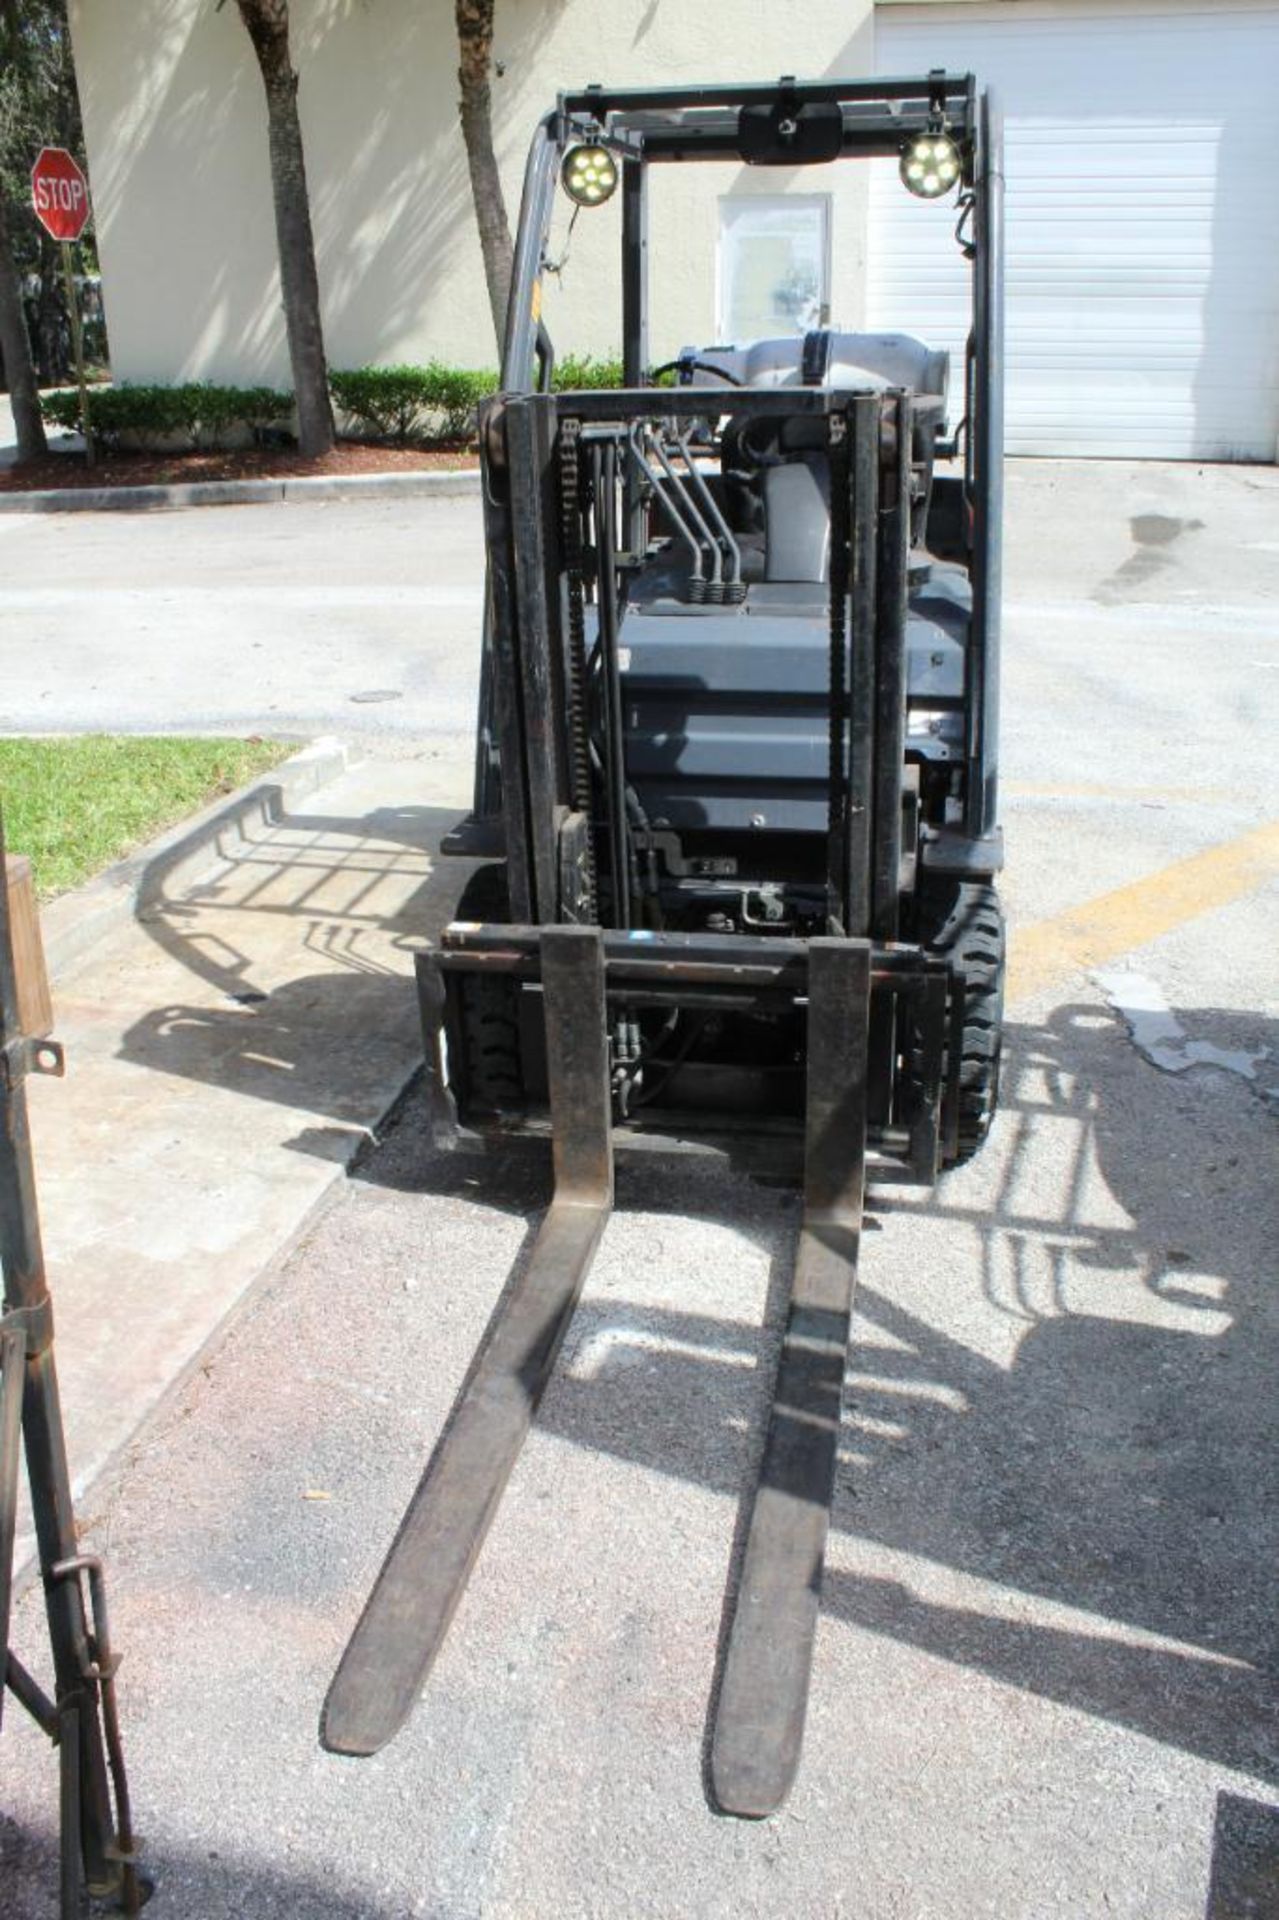 Toyota 8FGCU forklift - 8981 hours - w/lpg tank, side shift, 80 in lift, 4000 lb. capacity - Image 2 of 7